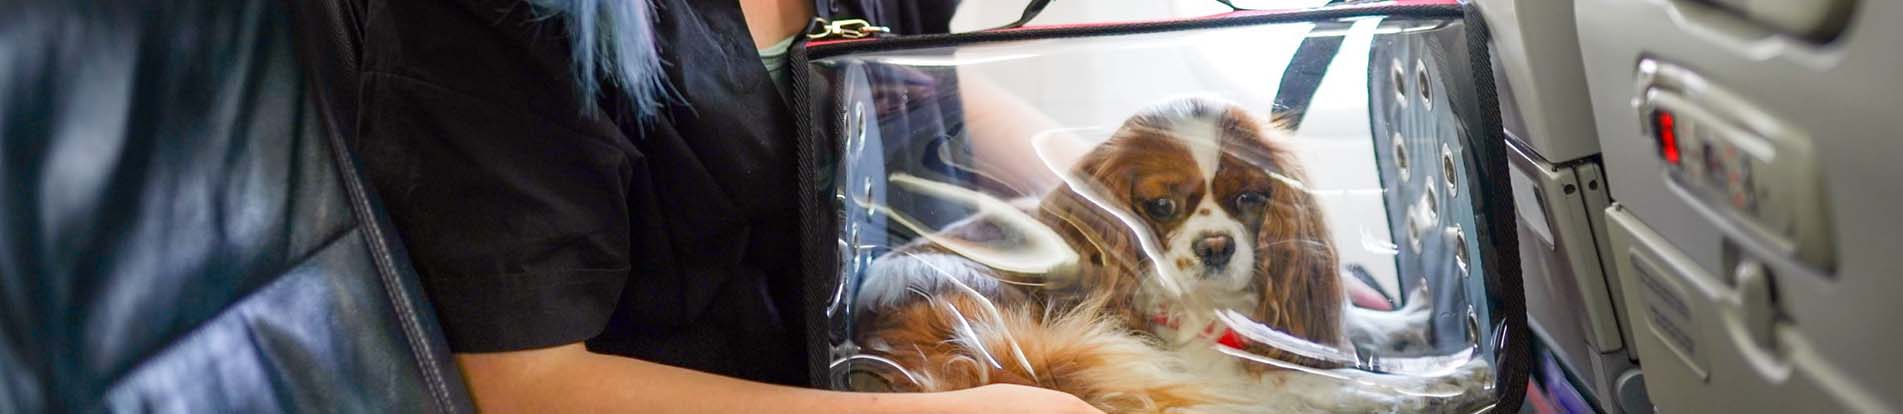 MAJOR U.S AIRLINES PET POLICY GUIDE